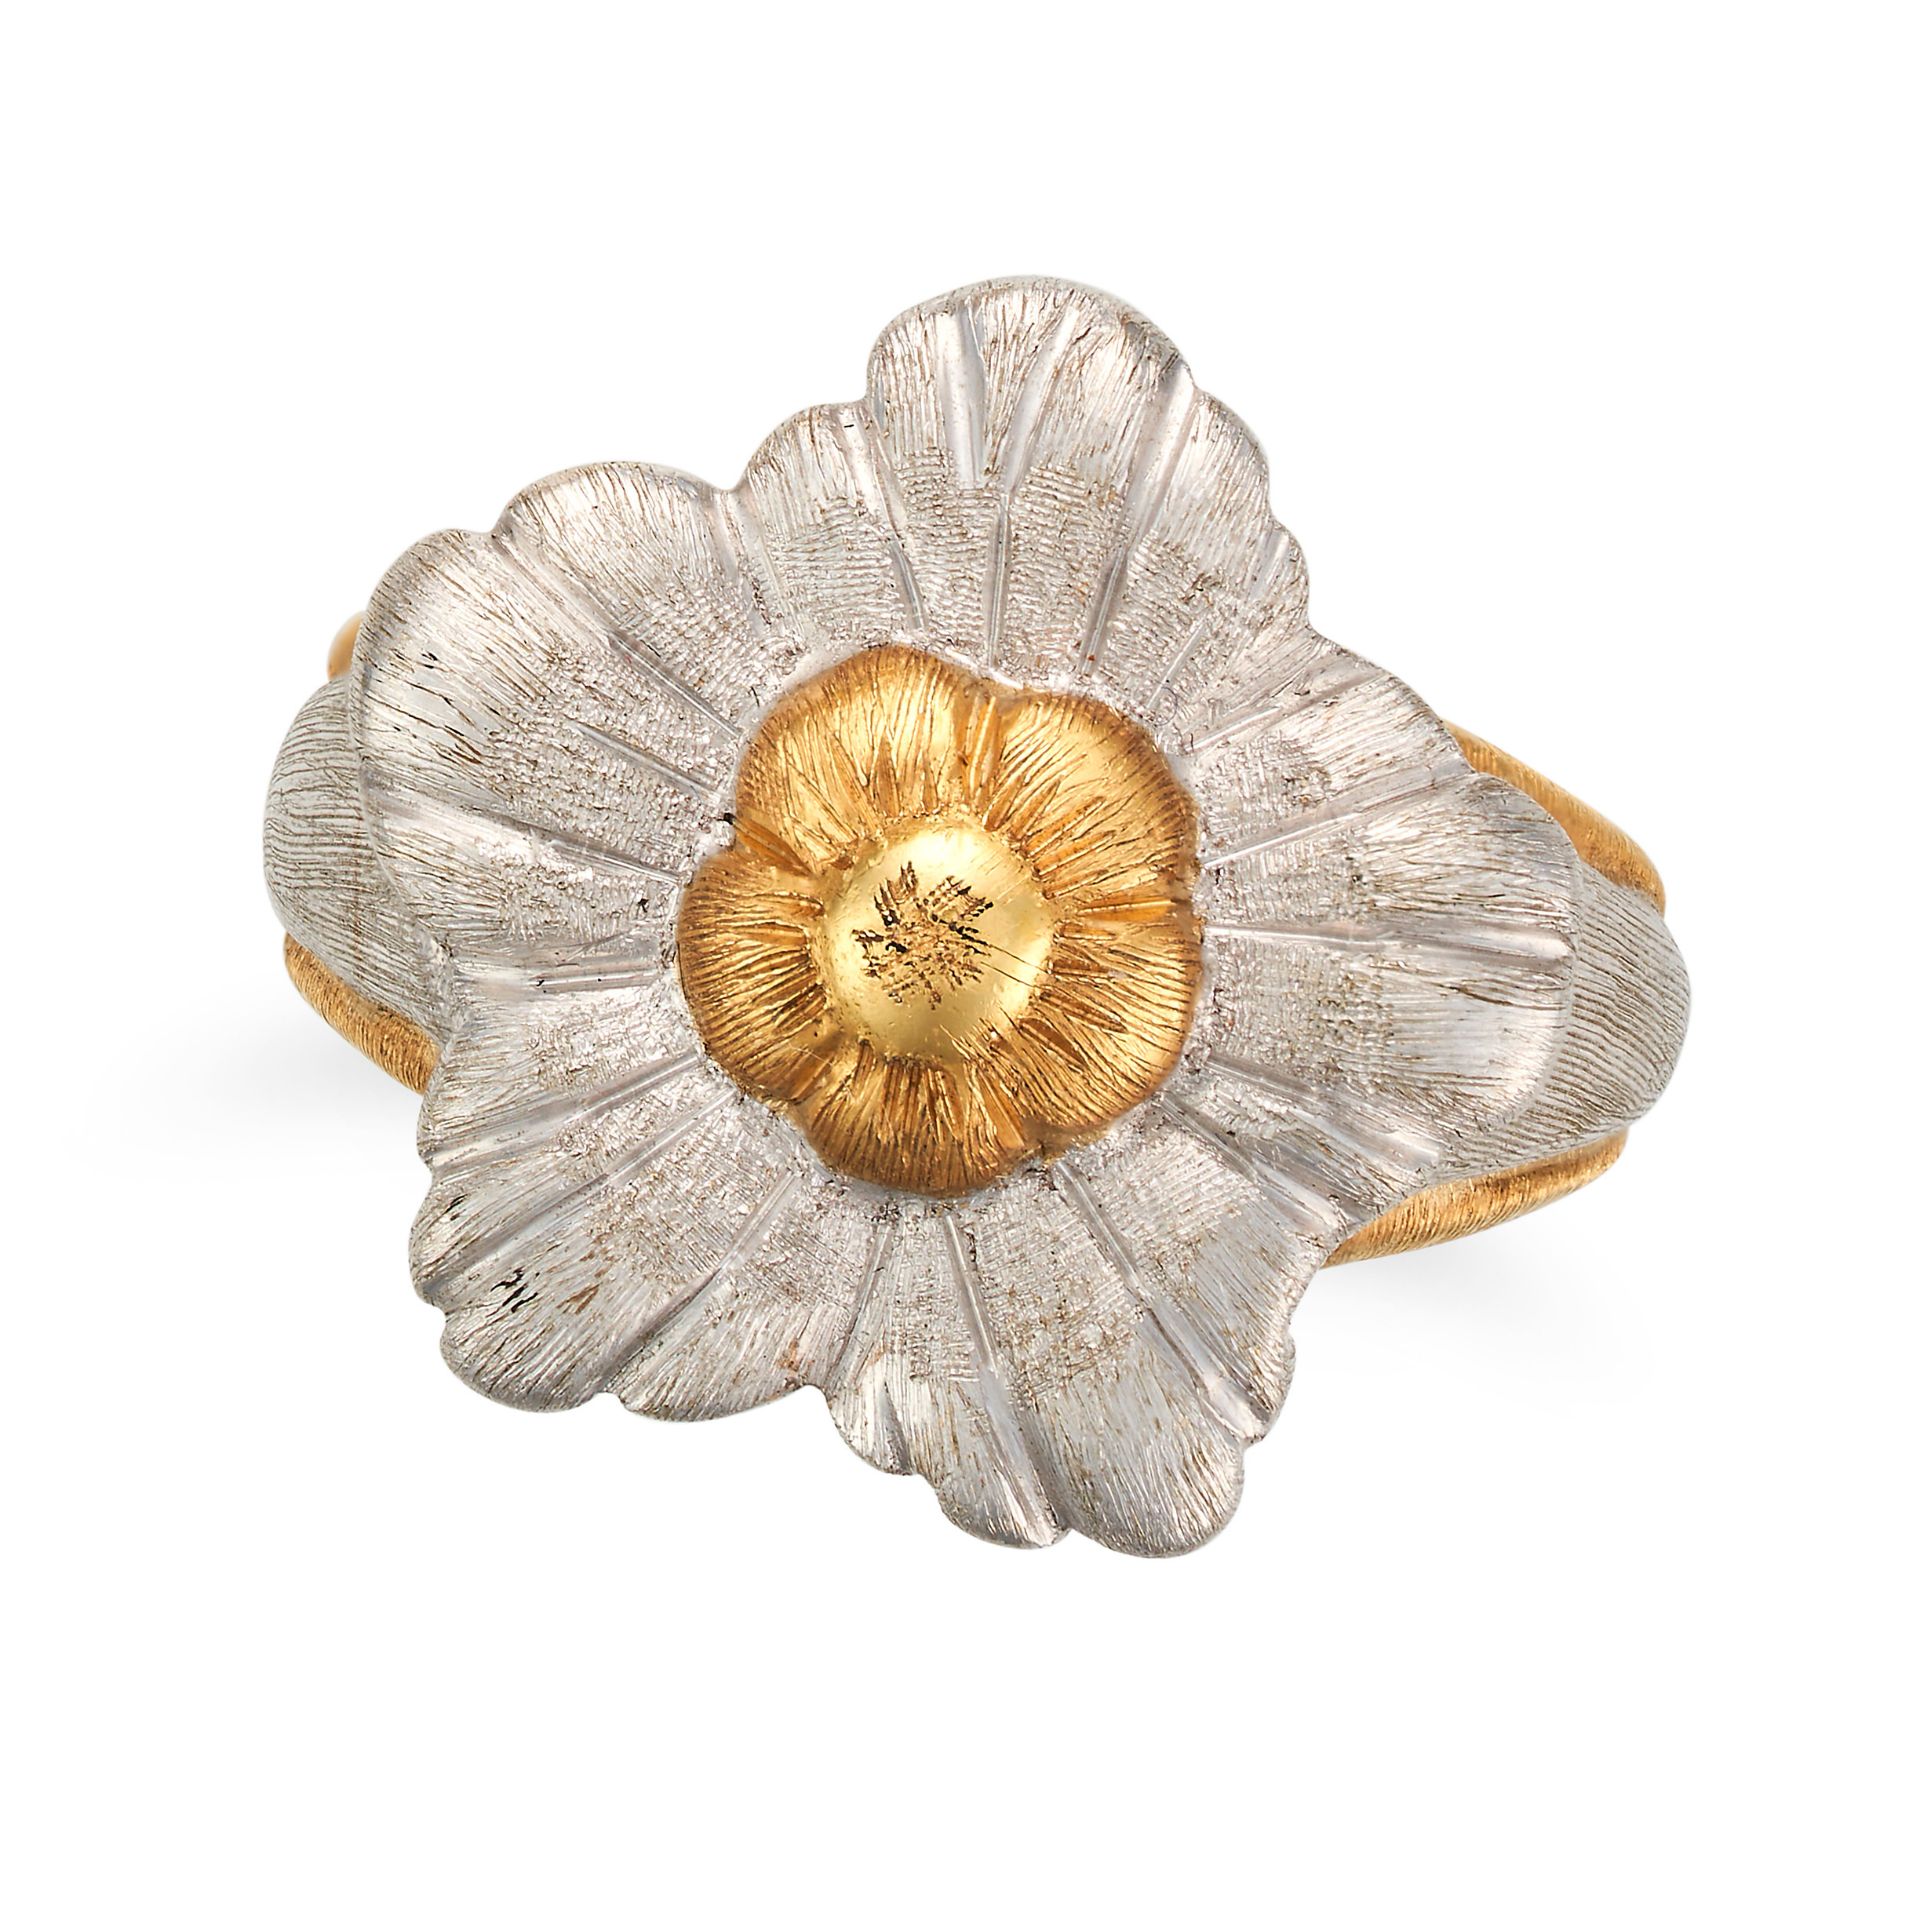 BUCCELLATI, A GOLD FLOWER RING designed as a flower head, signed Buccellati, stamped 18KT 750, si...